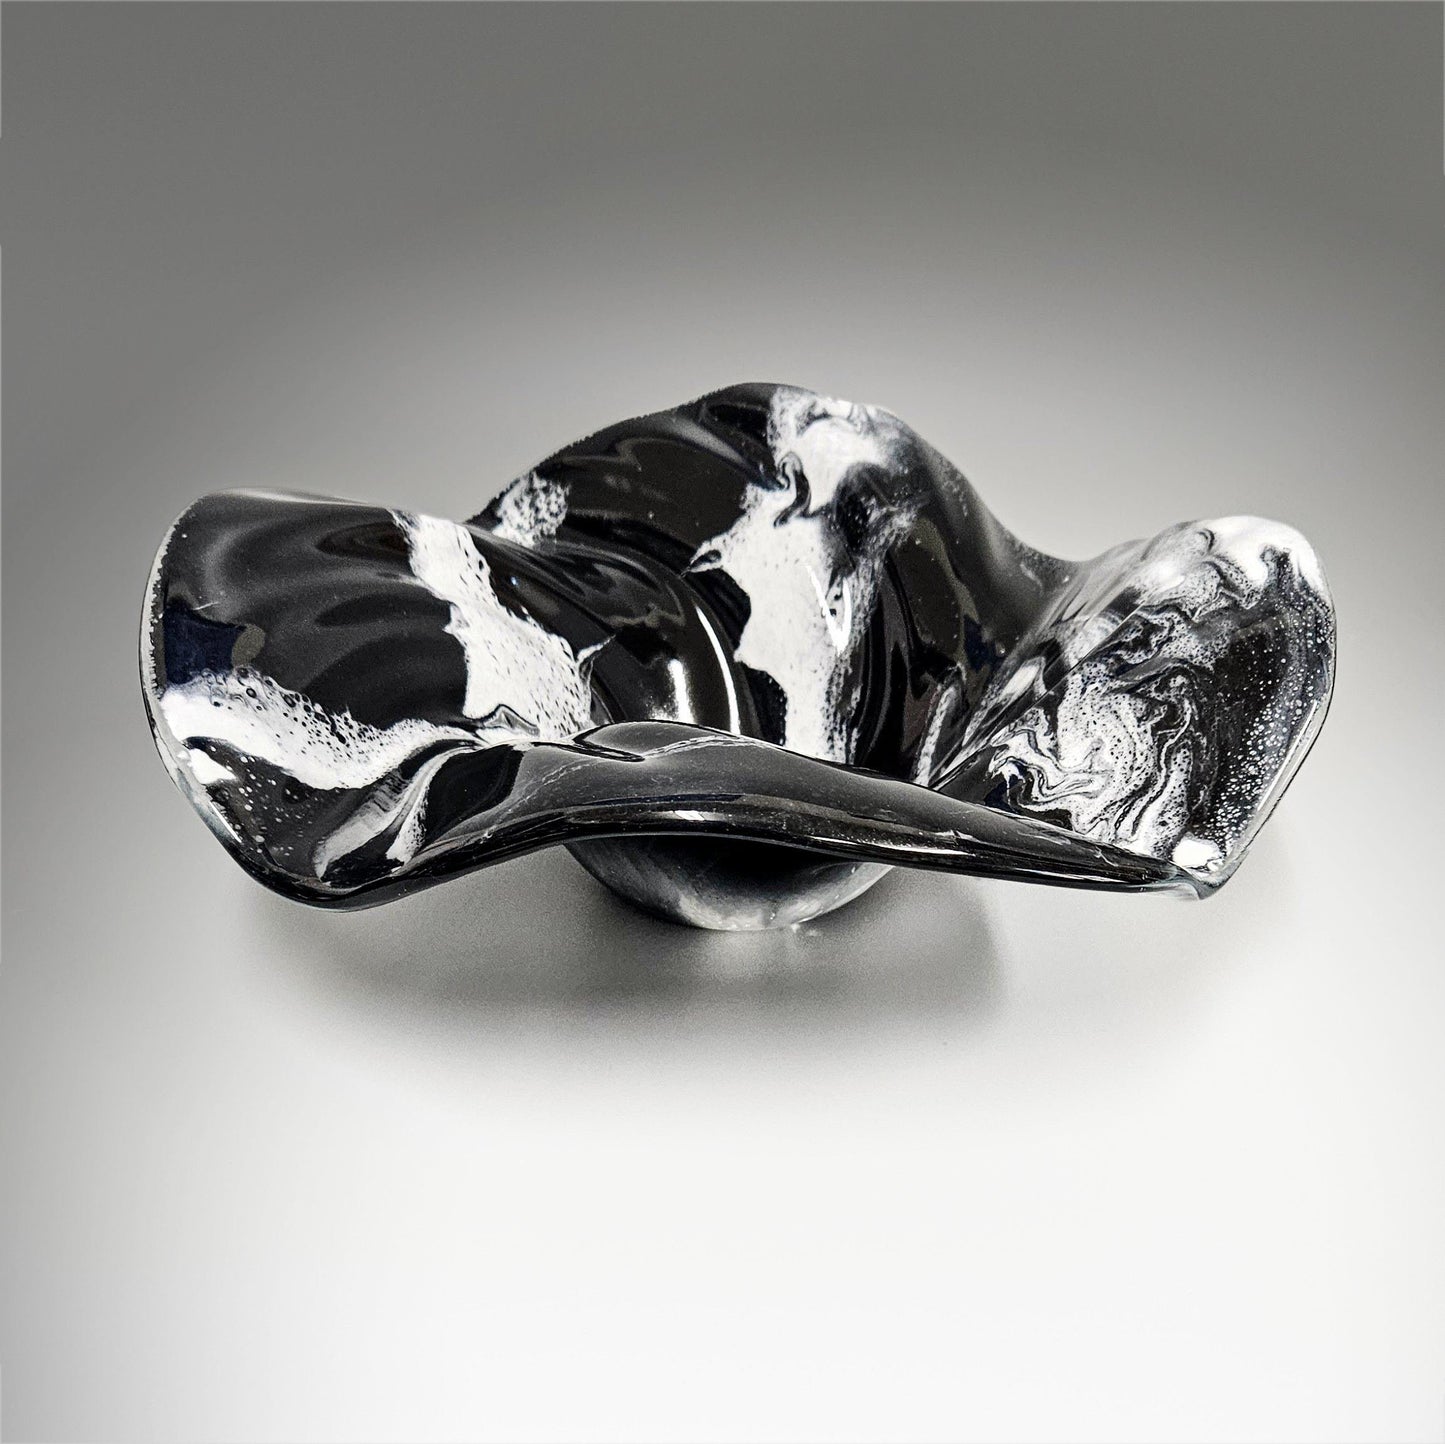 Abstract Glass Art Wave Bowl in Black and White